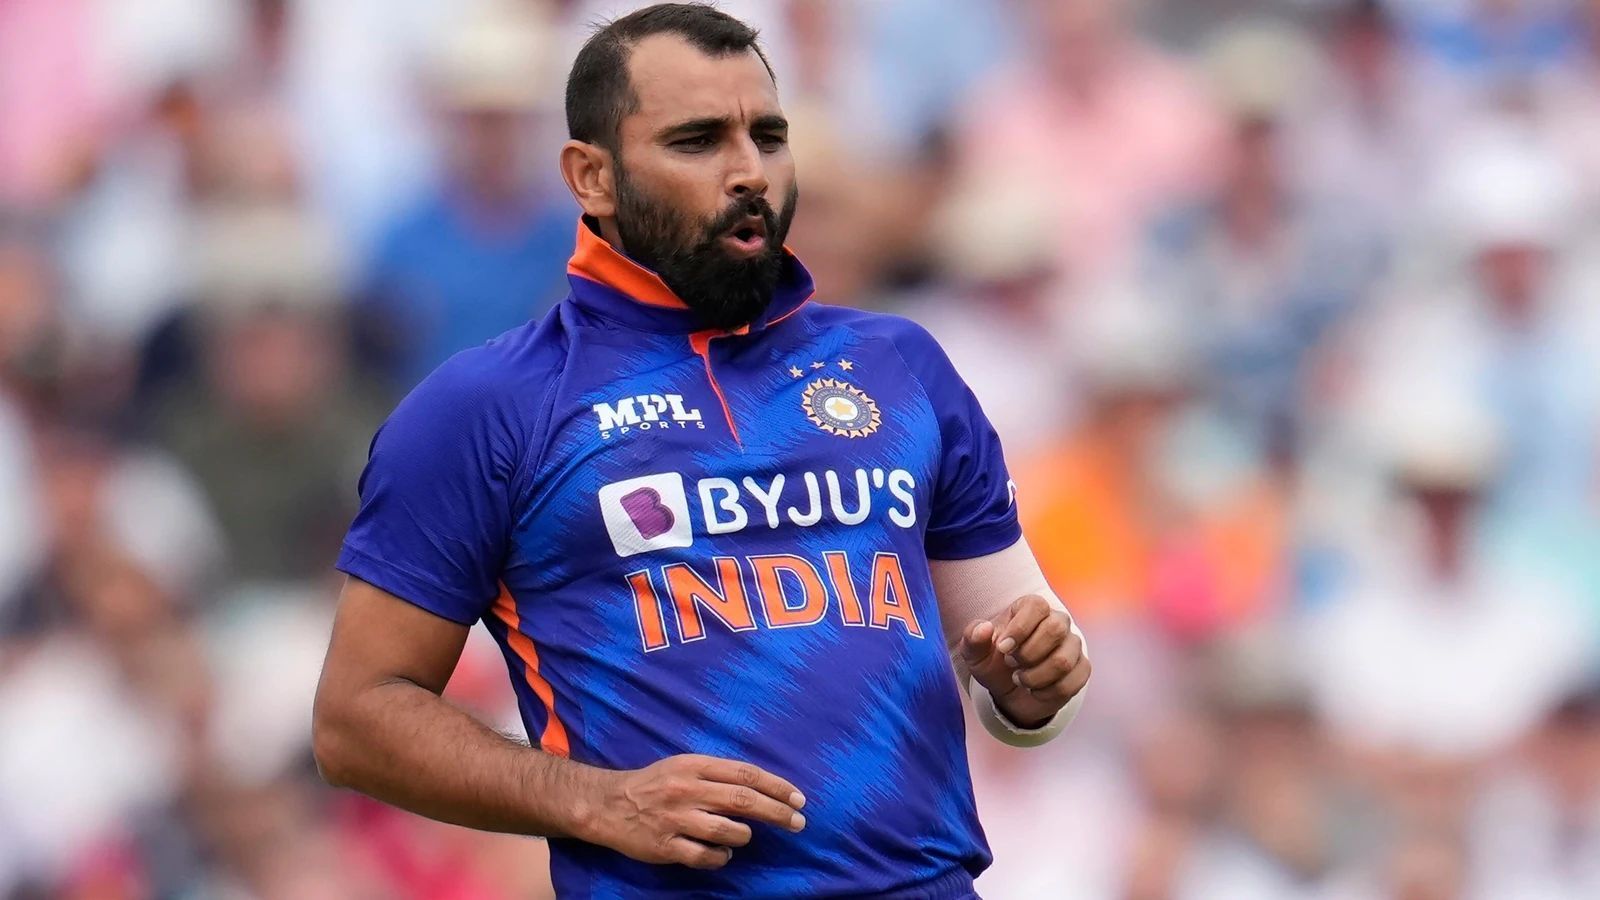 India might play Mohammed Shami in place of either Jasprit Bumrah or Mohammed Siraj.